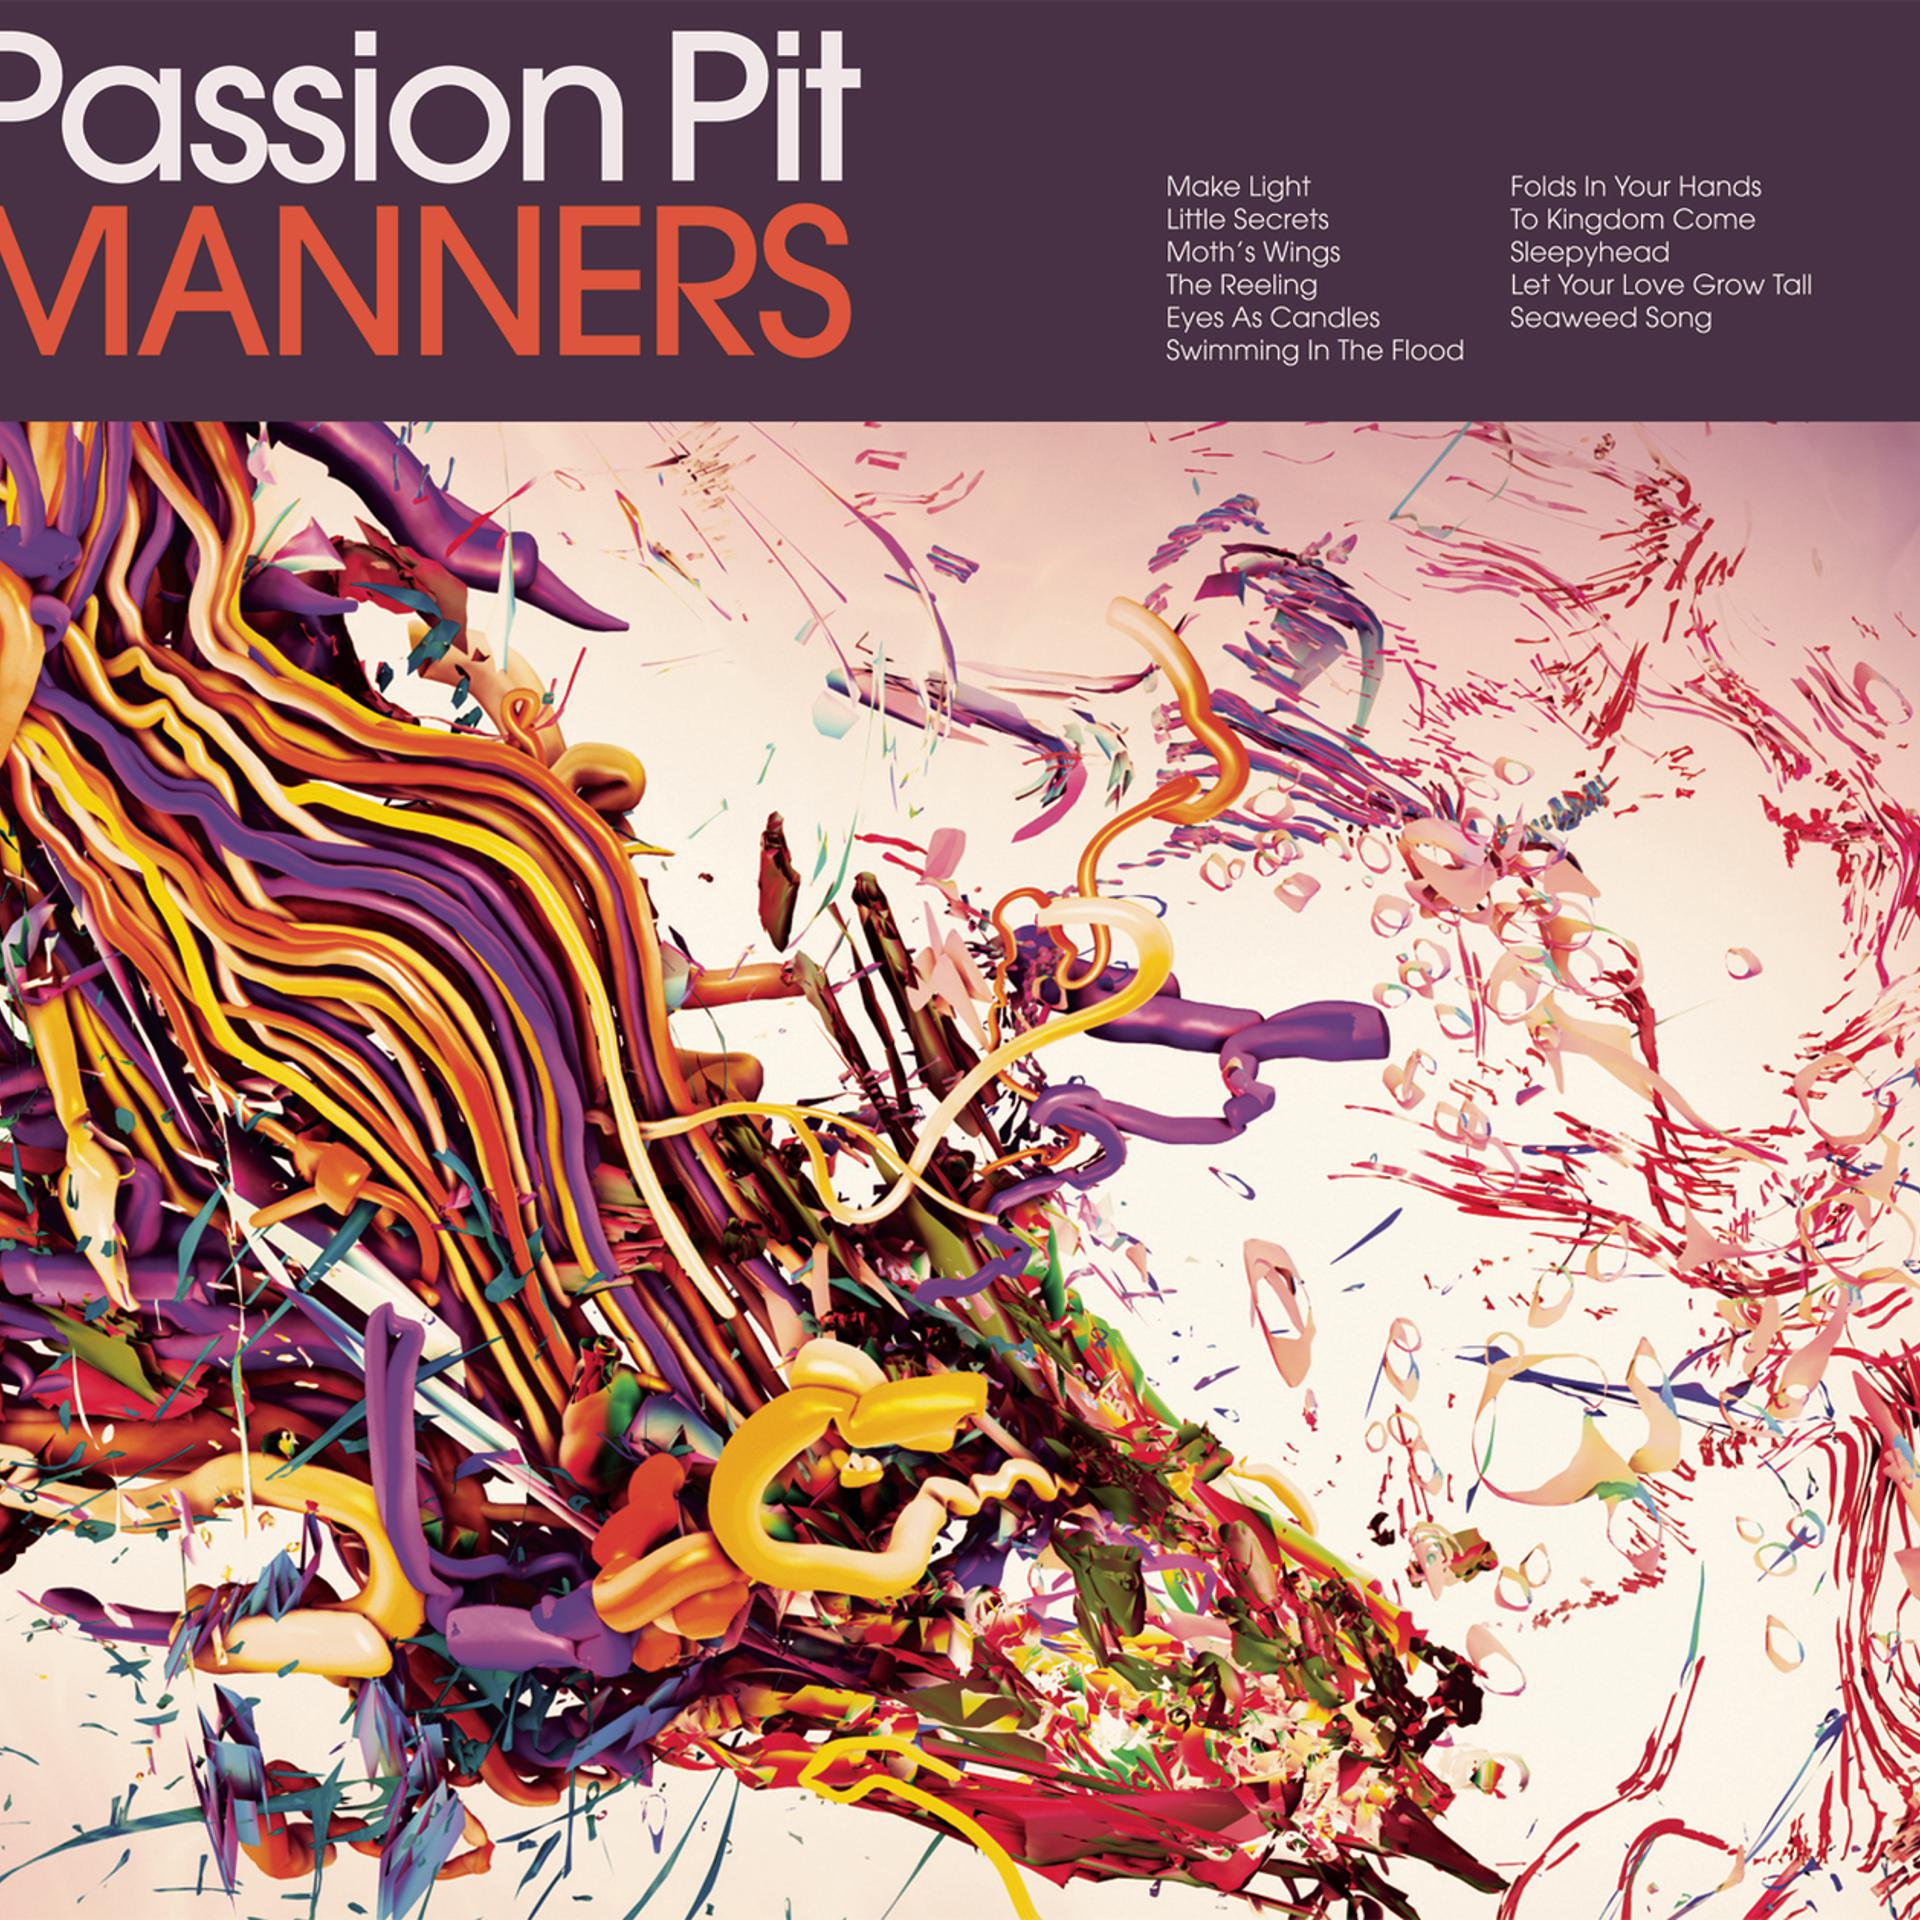 Passion pit. Passion Pit manners. Sleepyhead passion Pit. CD passion Pit: manners. Passion Sleepyhead.